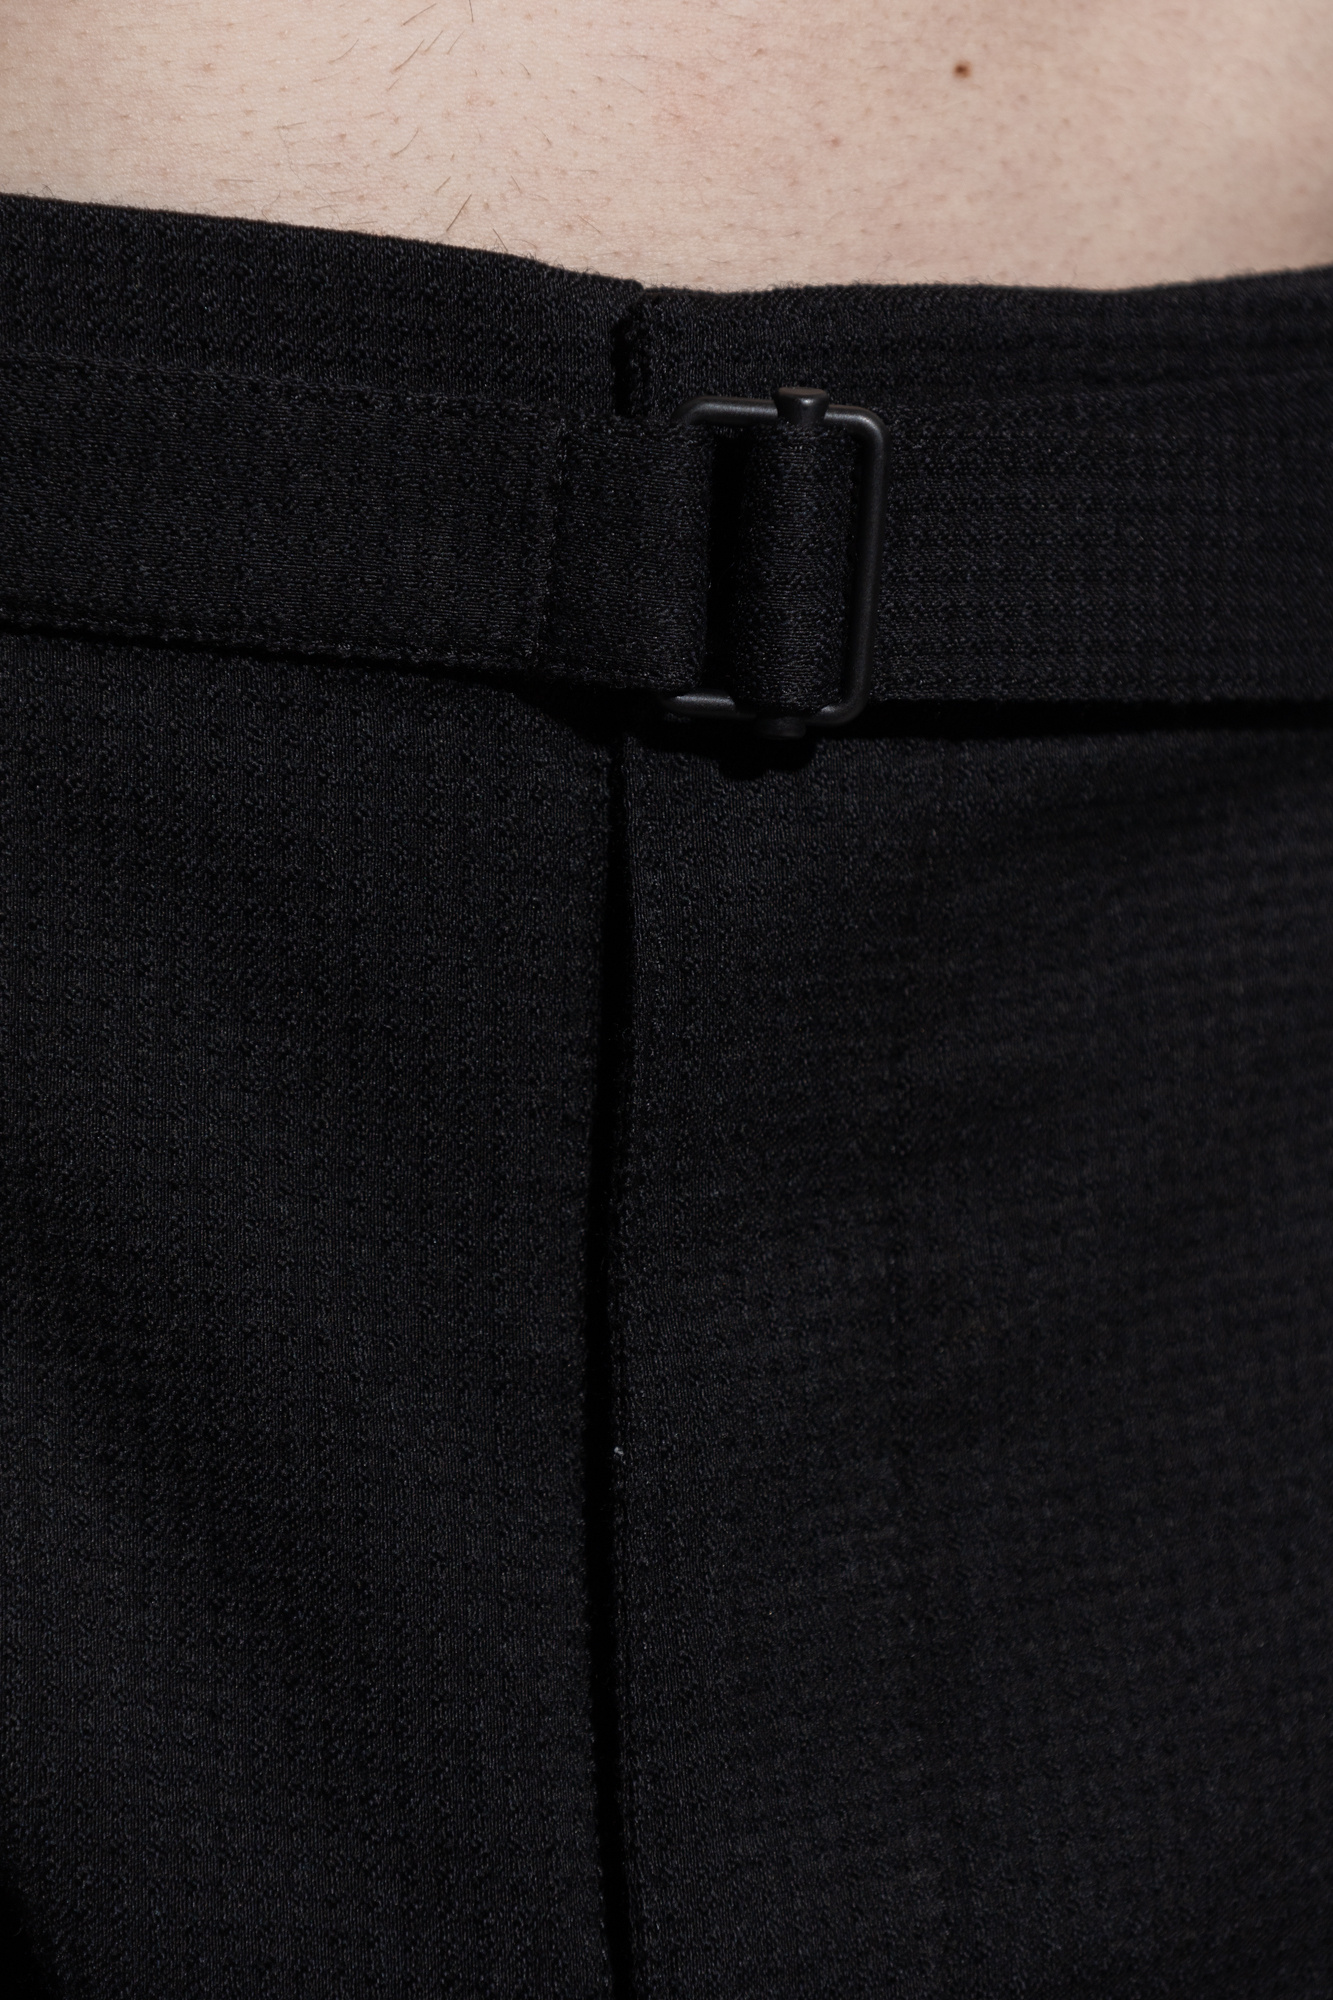 London Wool Blend Textured Double Pleated Trousers